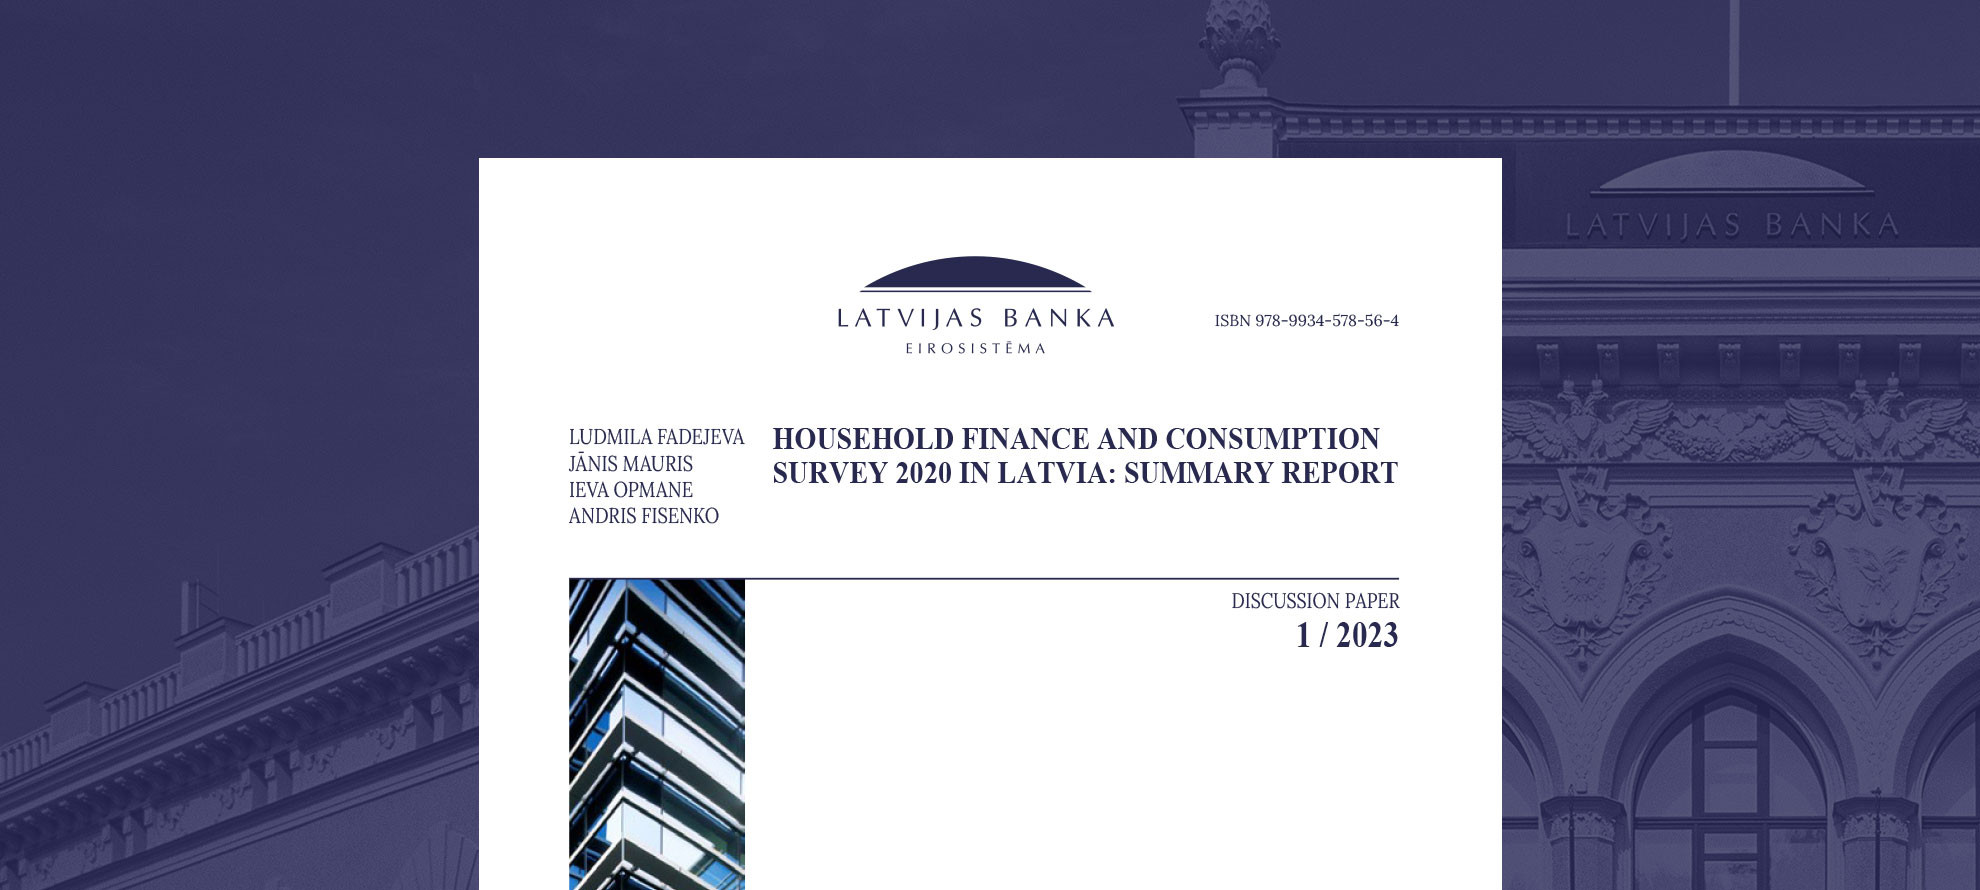 Household Finance and Consumption Survey 2020 in Latvia: Summary Report